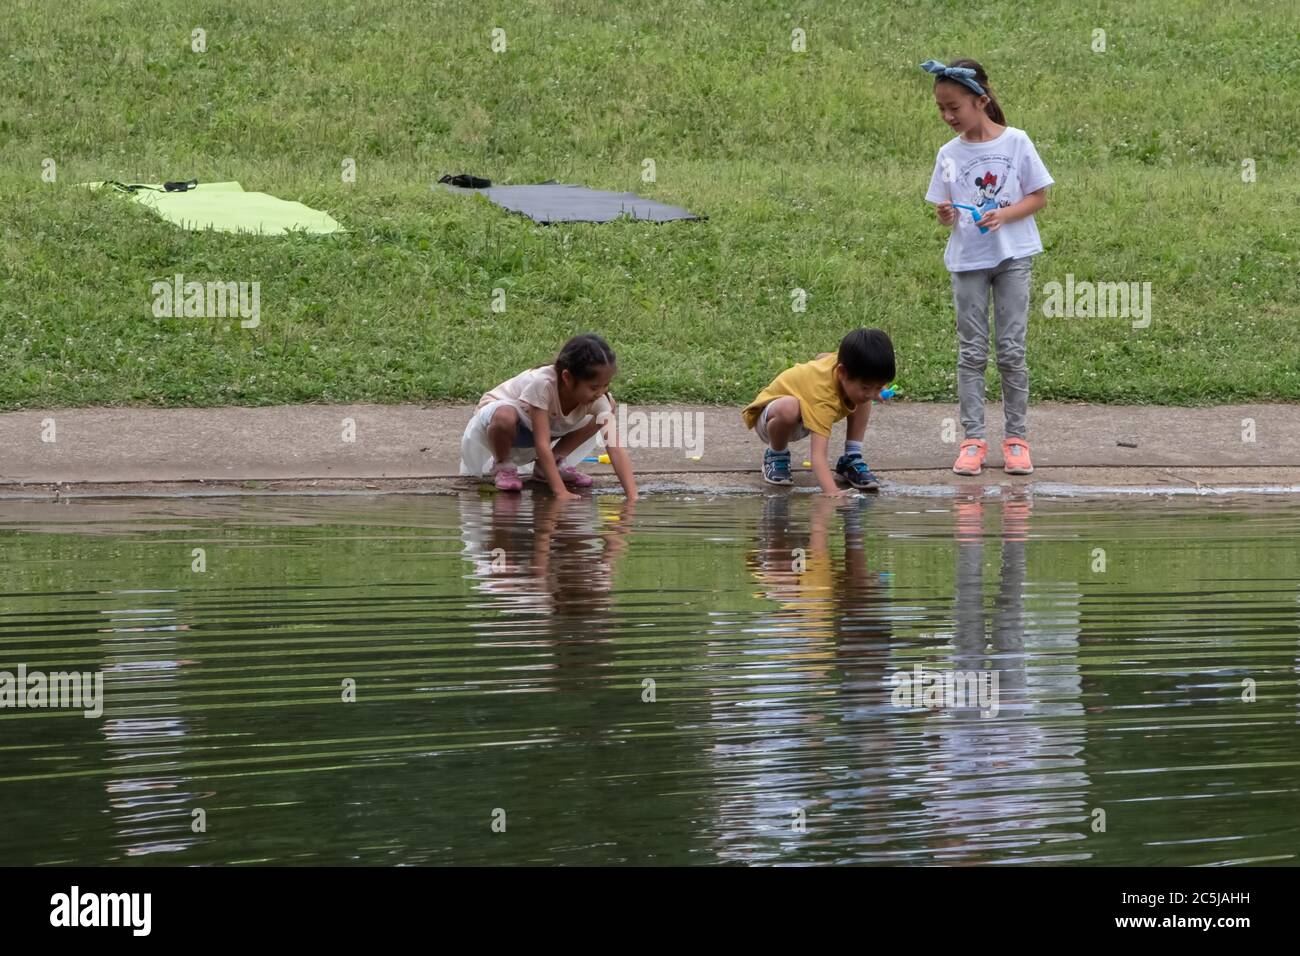 Children playing with water at a pond in Yoyogi Park, Tokyo, Japan Stock Photo